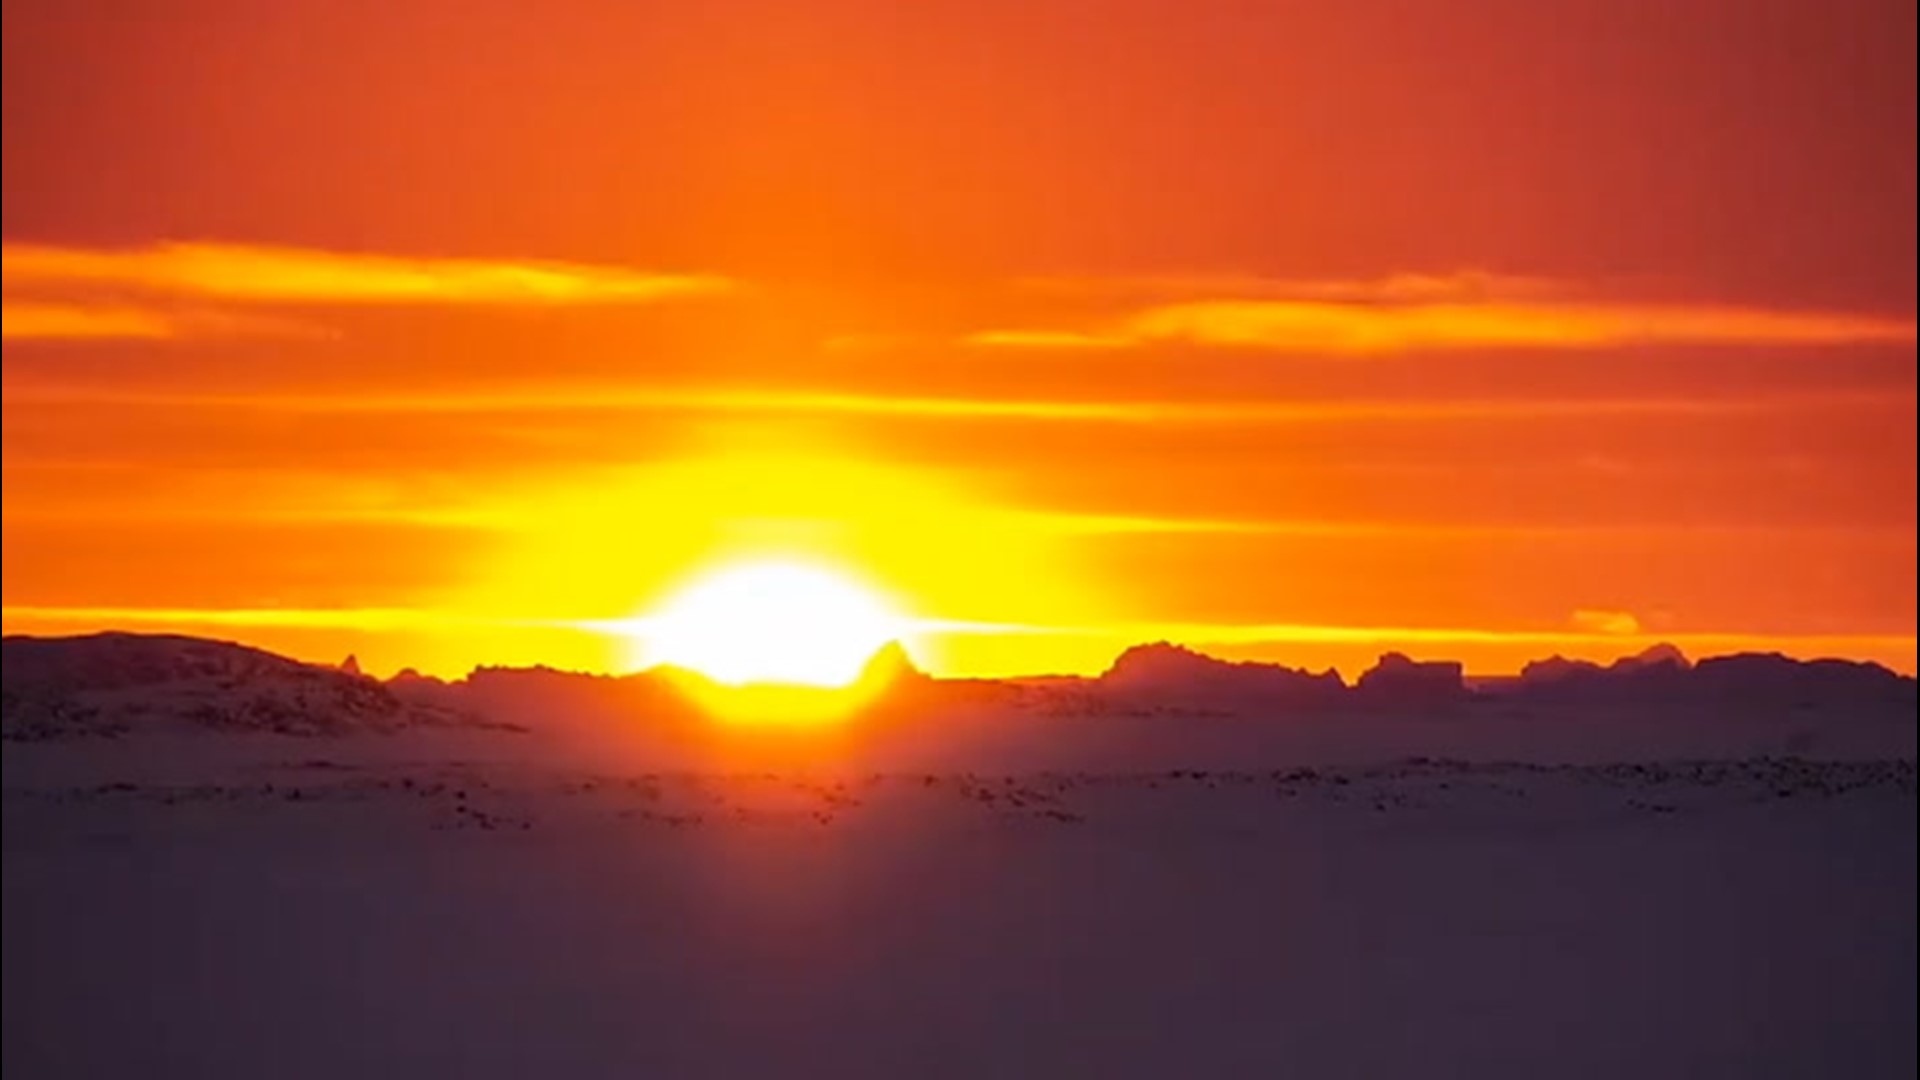 The sun has said goodbye to Antarctica... for five weeks. The last sunset was captured on June 2 near the Davis Research Station. The next sunrise will be on July 10.